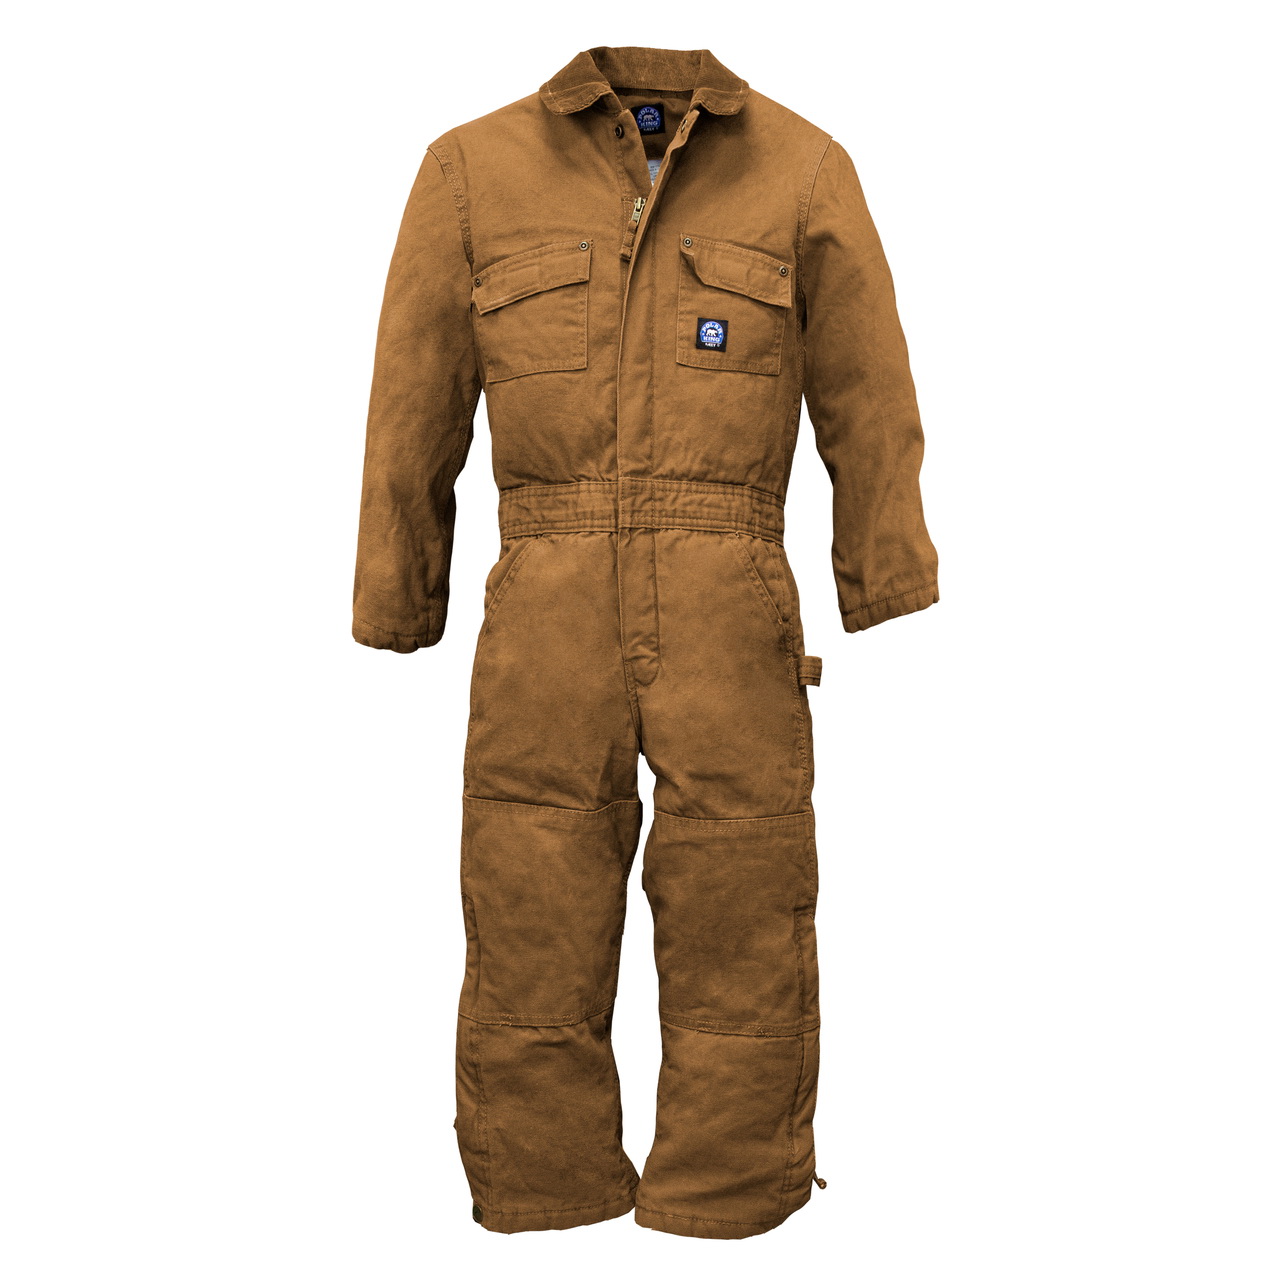 Polar King 959.28 L Coveralls, Youth's Insulated, Boy's